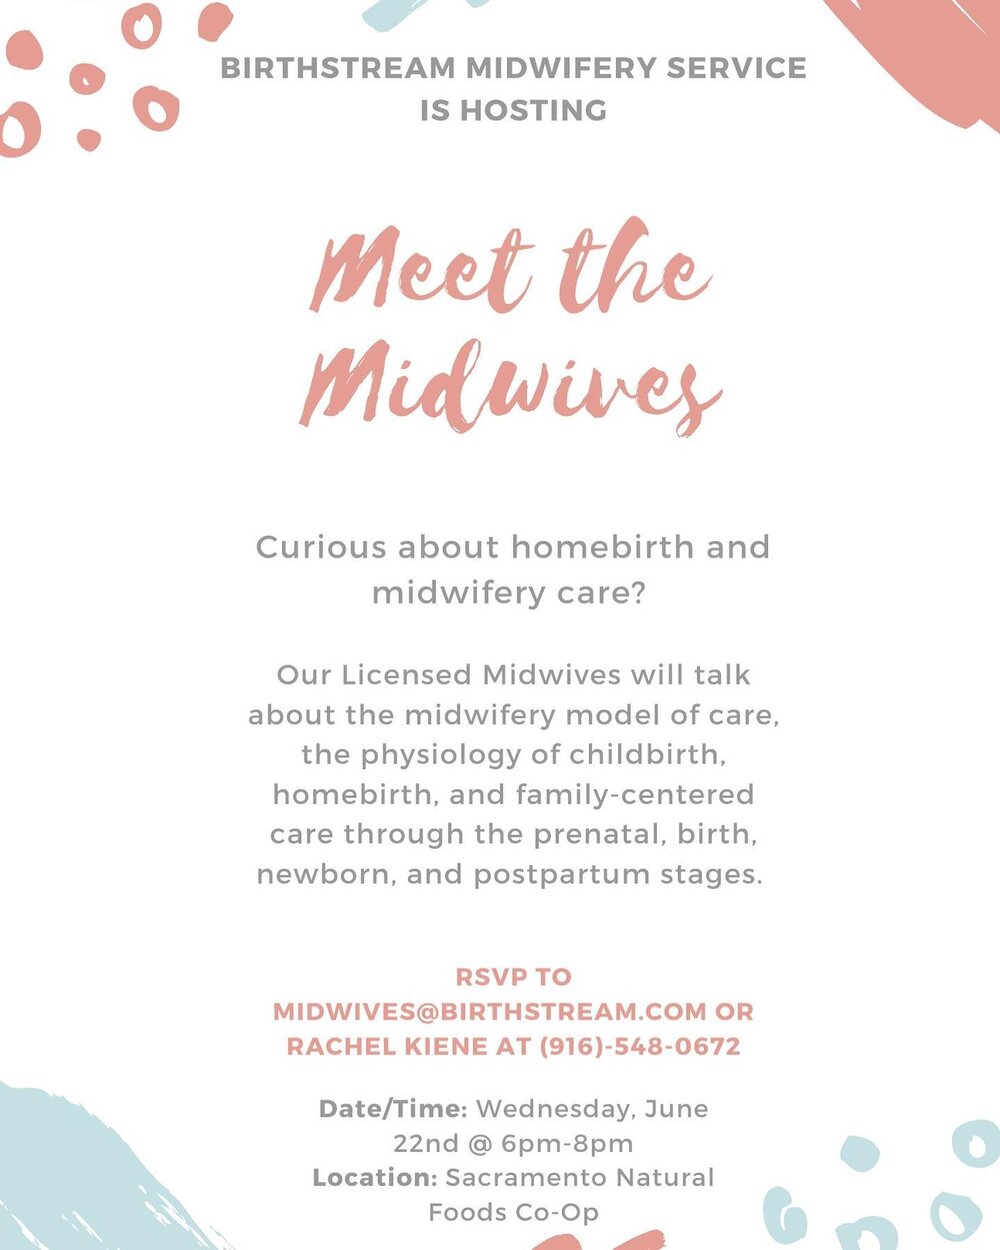 We hope you can join us for this event! Please see the details on our flyer. 

See you there!!

#midwivesinaprons #homebirth #licensedmidwives #birthisnormal